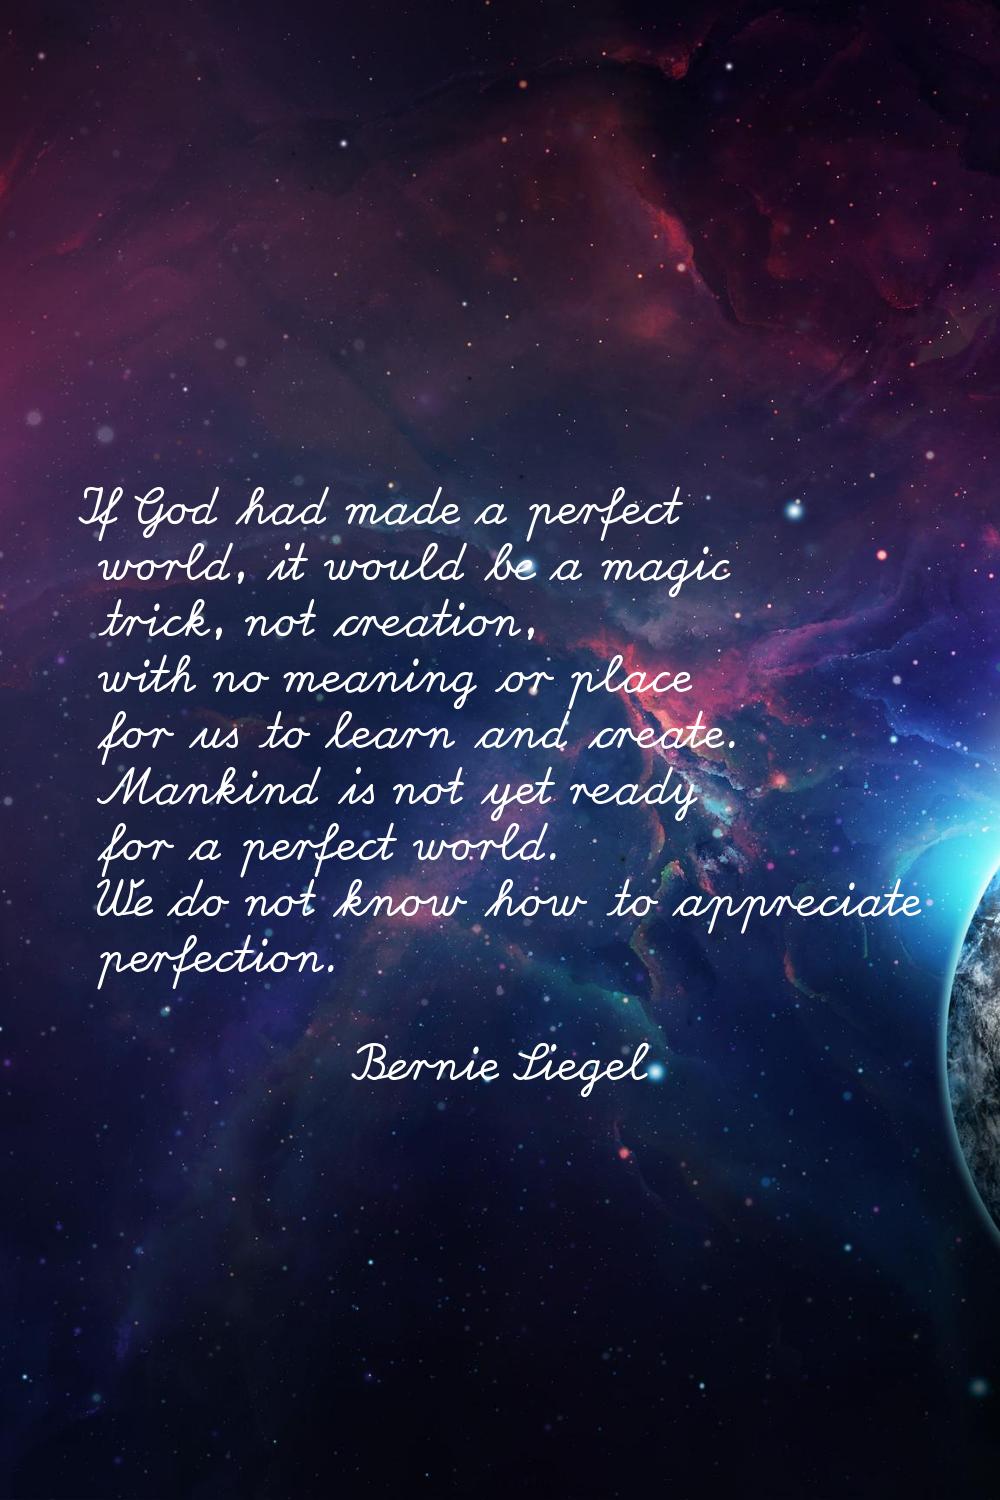 If God had made a perfect world, it would be a magic trick, not creation, with no meaning or place 